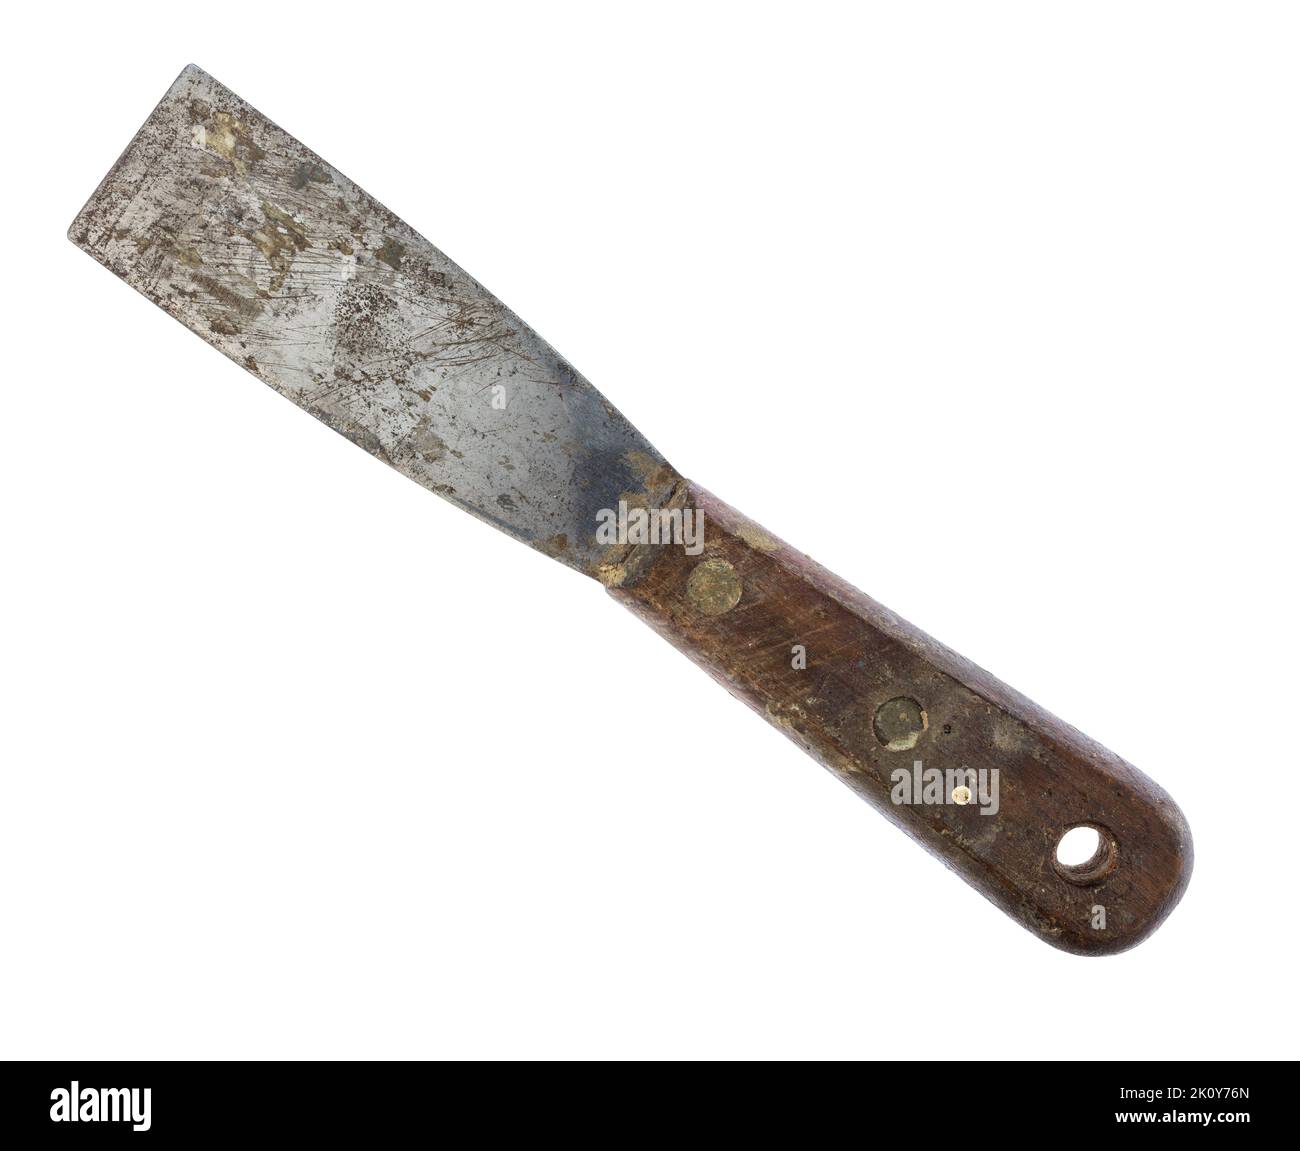 Top view of an old used putty knife isolated on a white background. Stock Photo